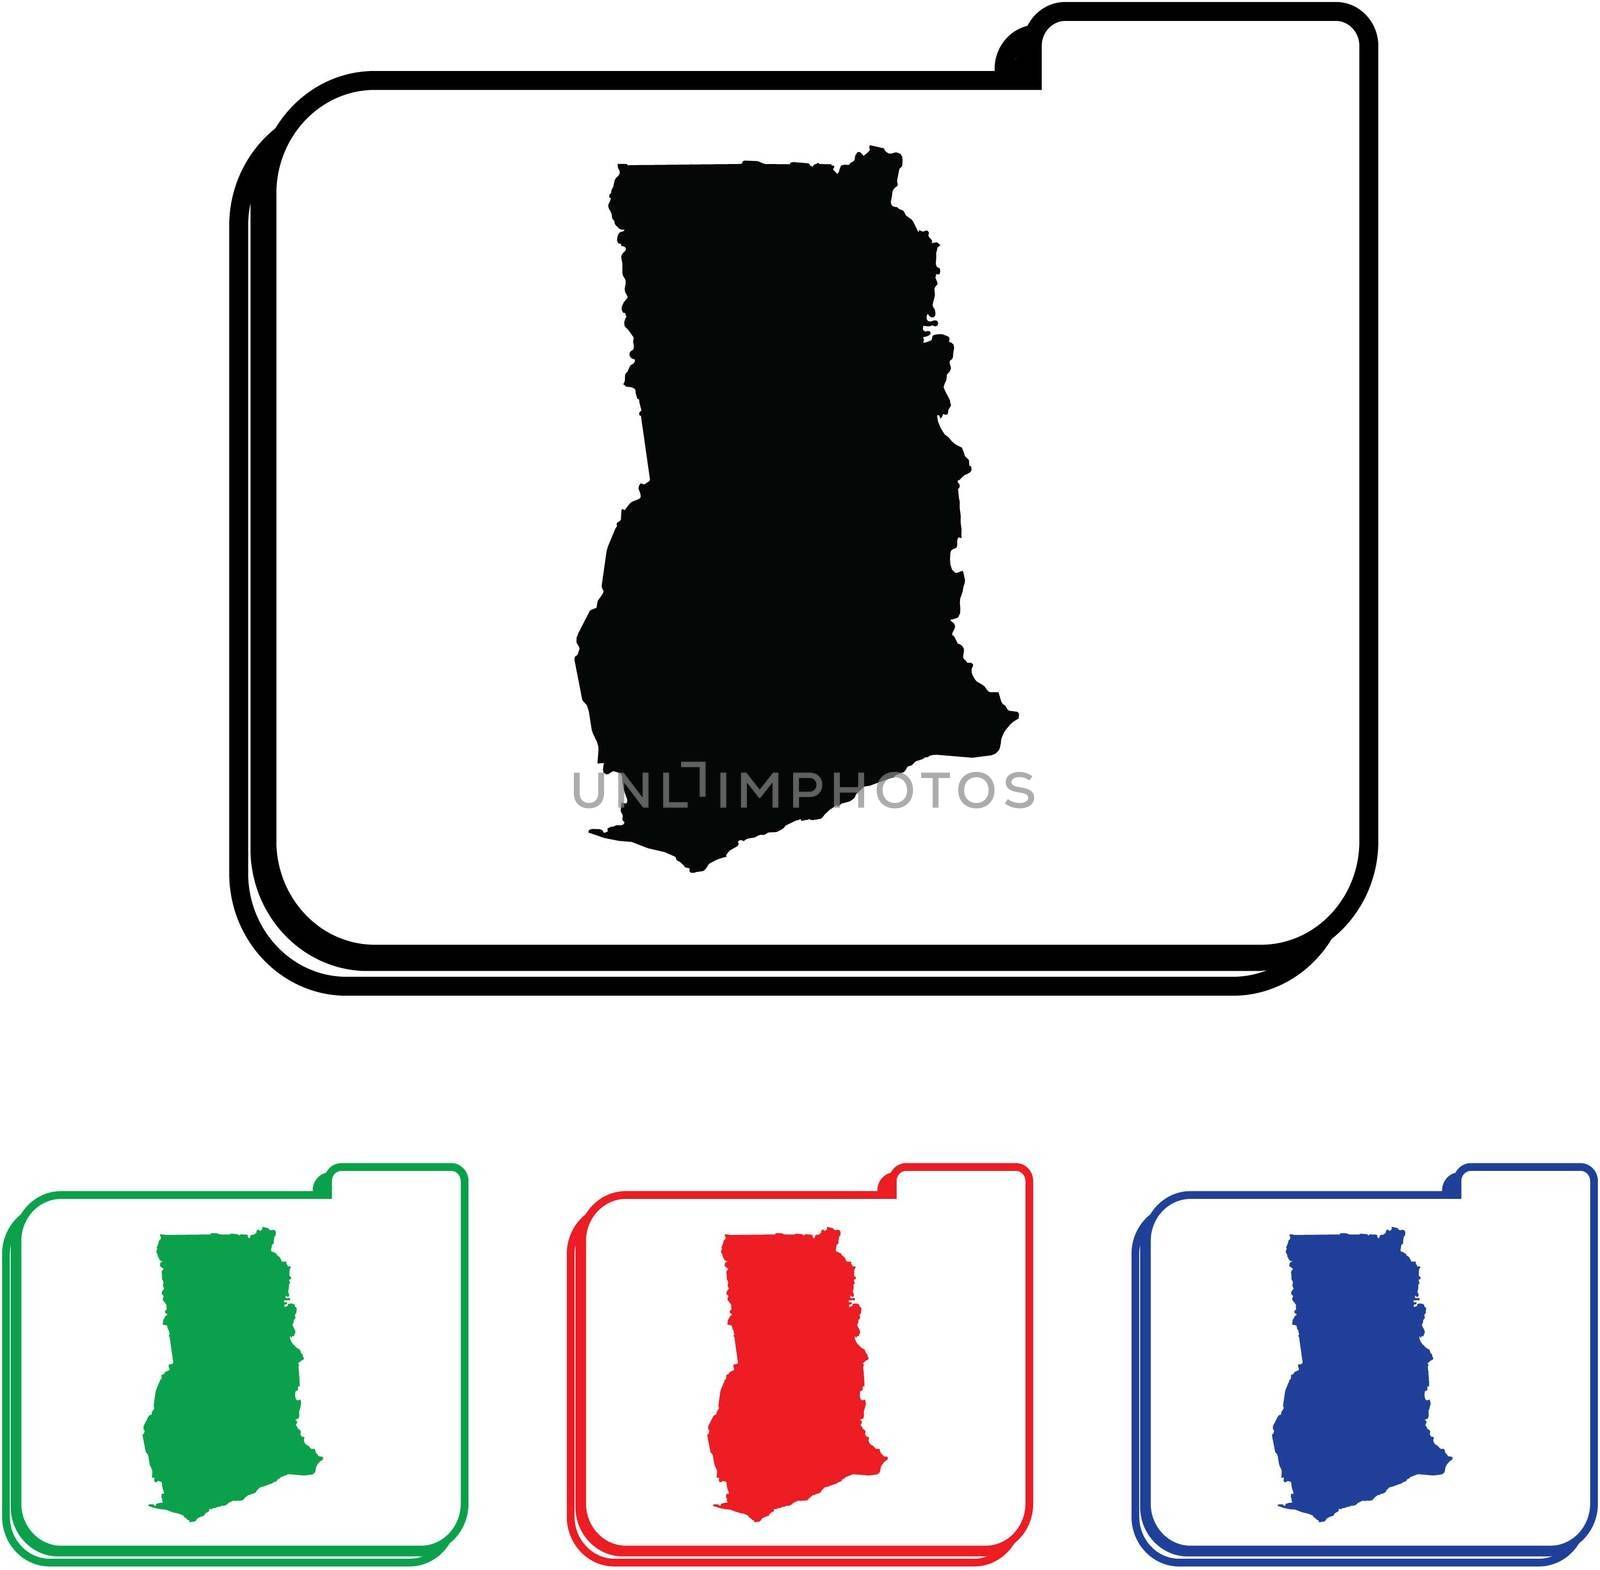 Ghana Icon Illustration with Four Color Variations